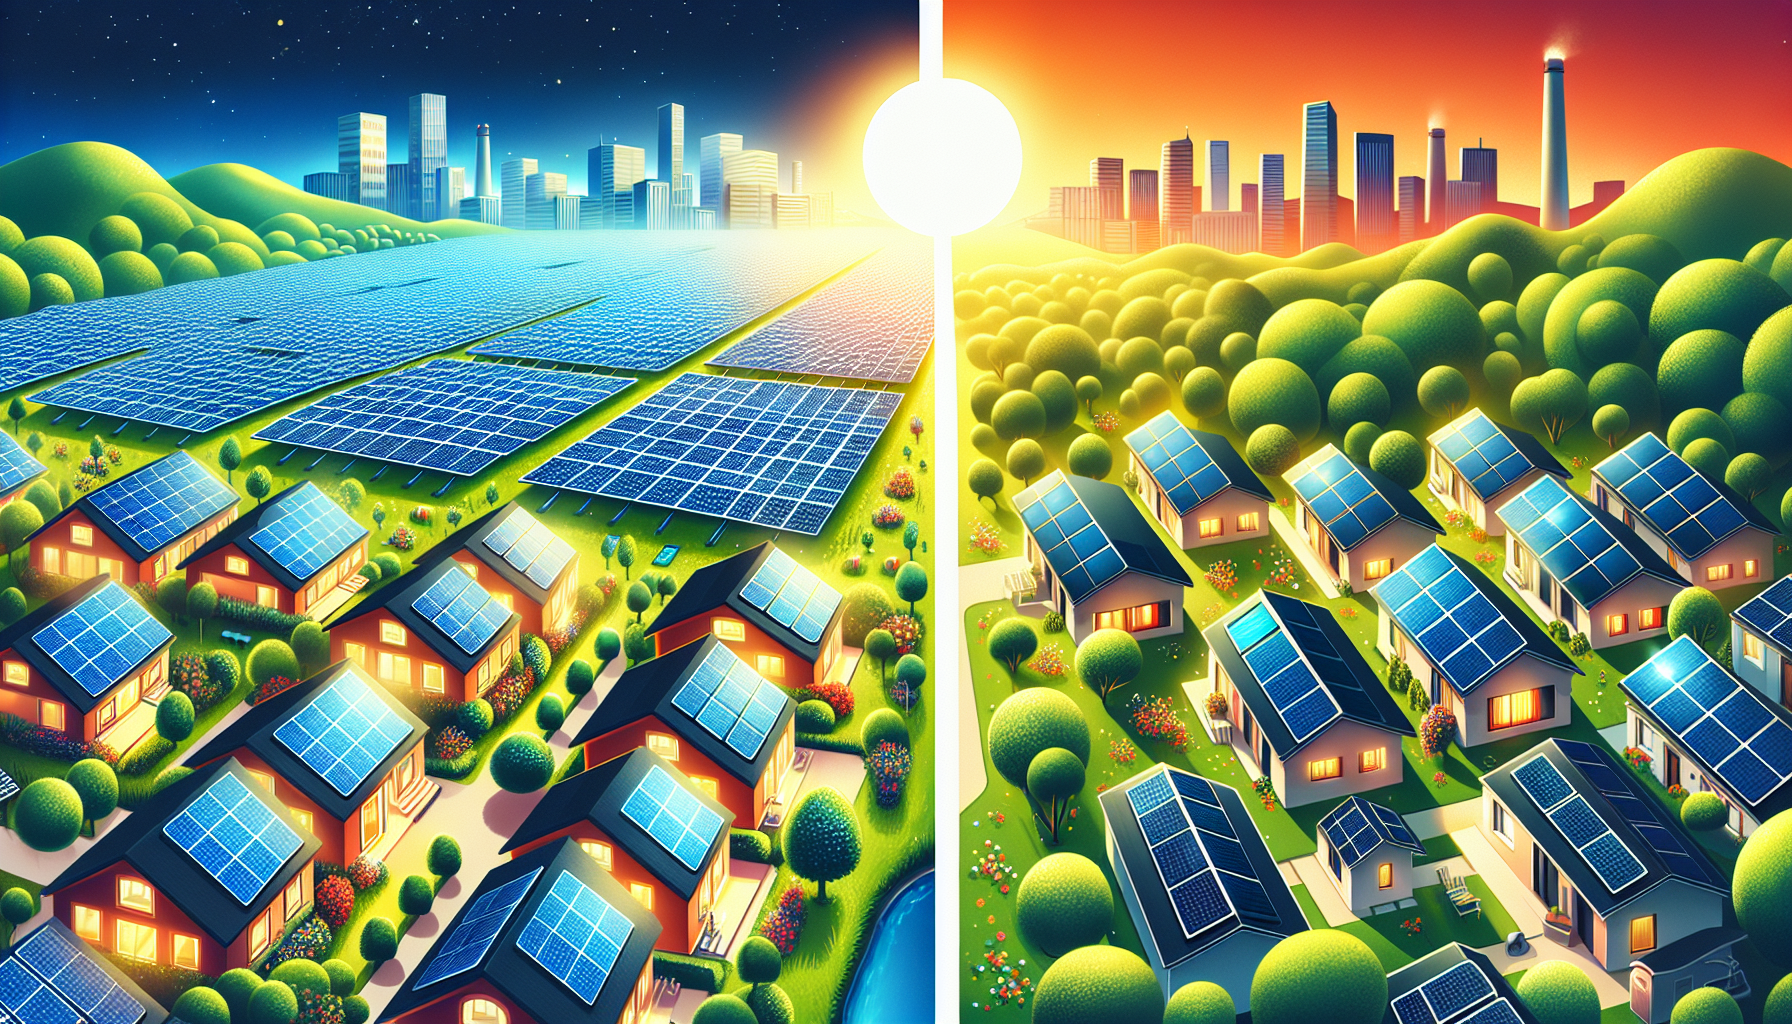 Illustration of community solar and rooftop solar panels